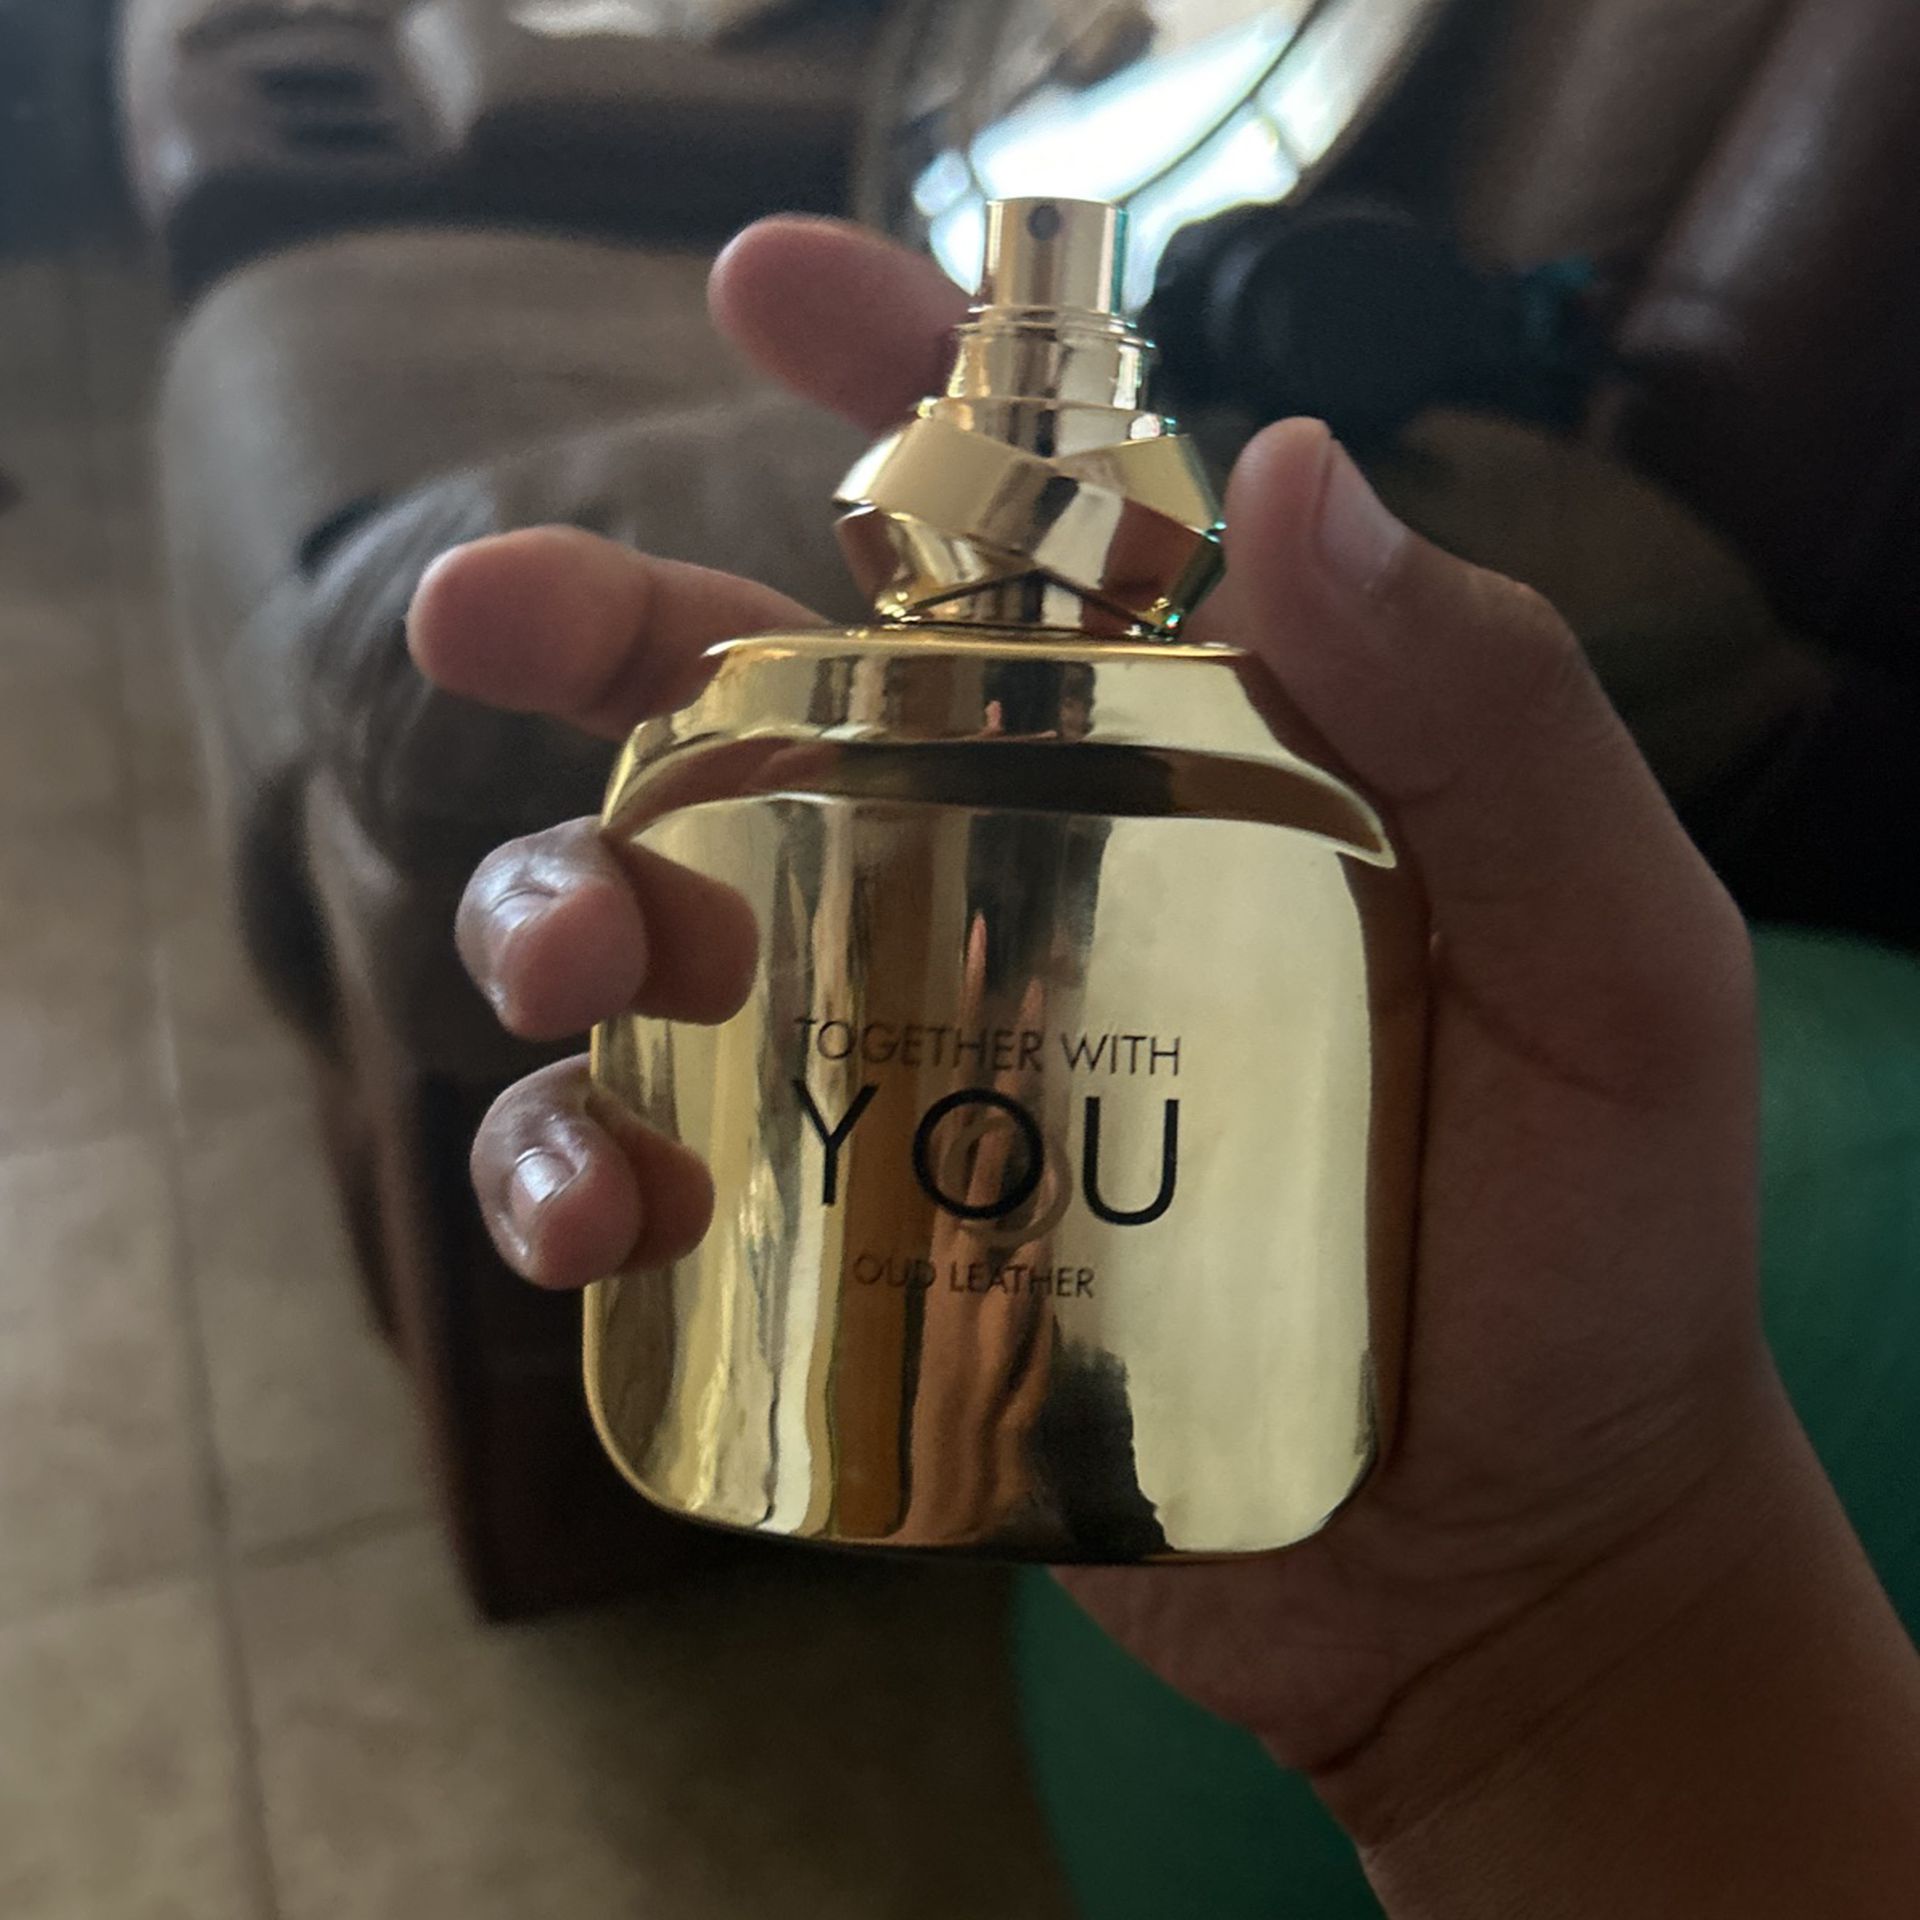 You Oud Leather Fragrance 